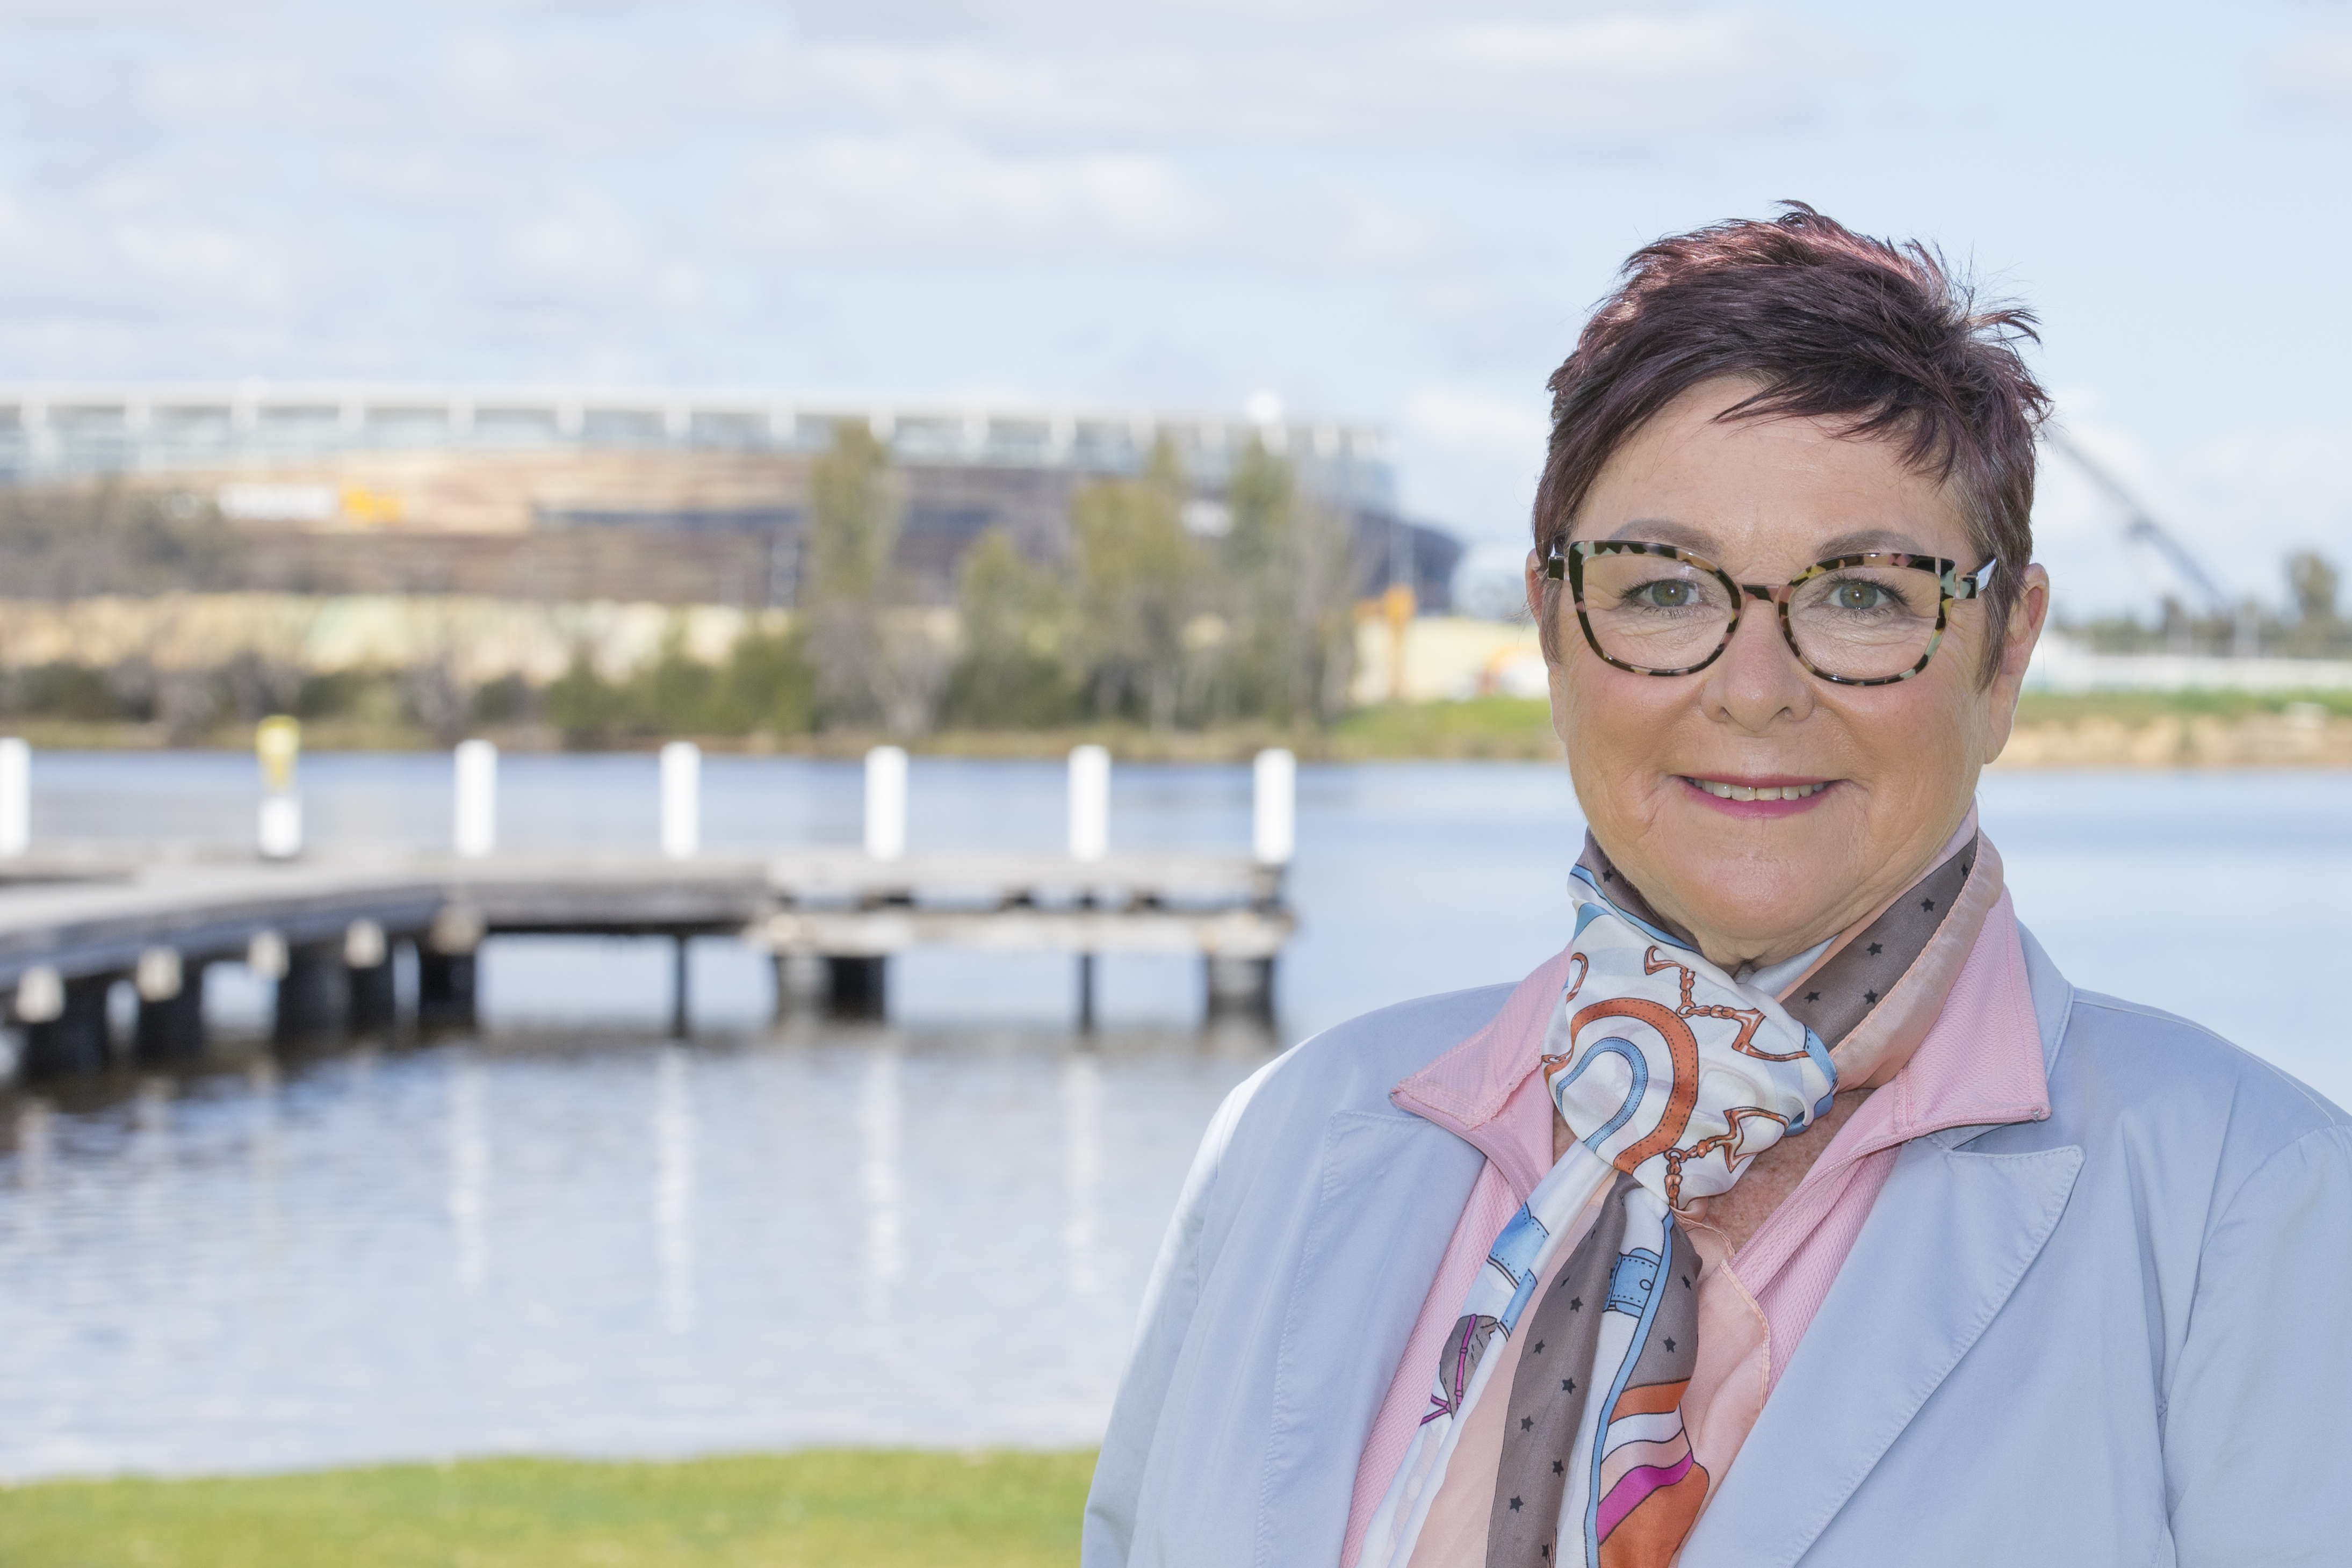 Image of Lisa Baker with Swan River, Maylands area in background